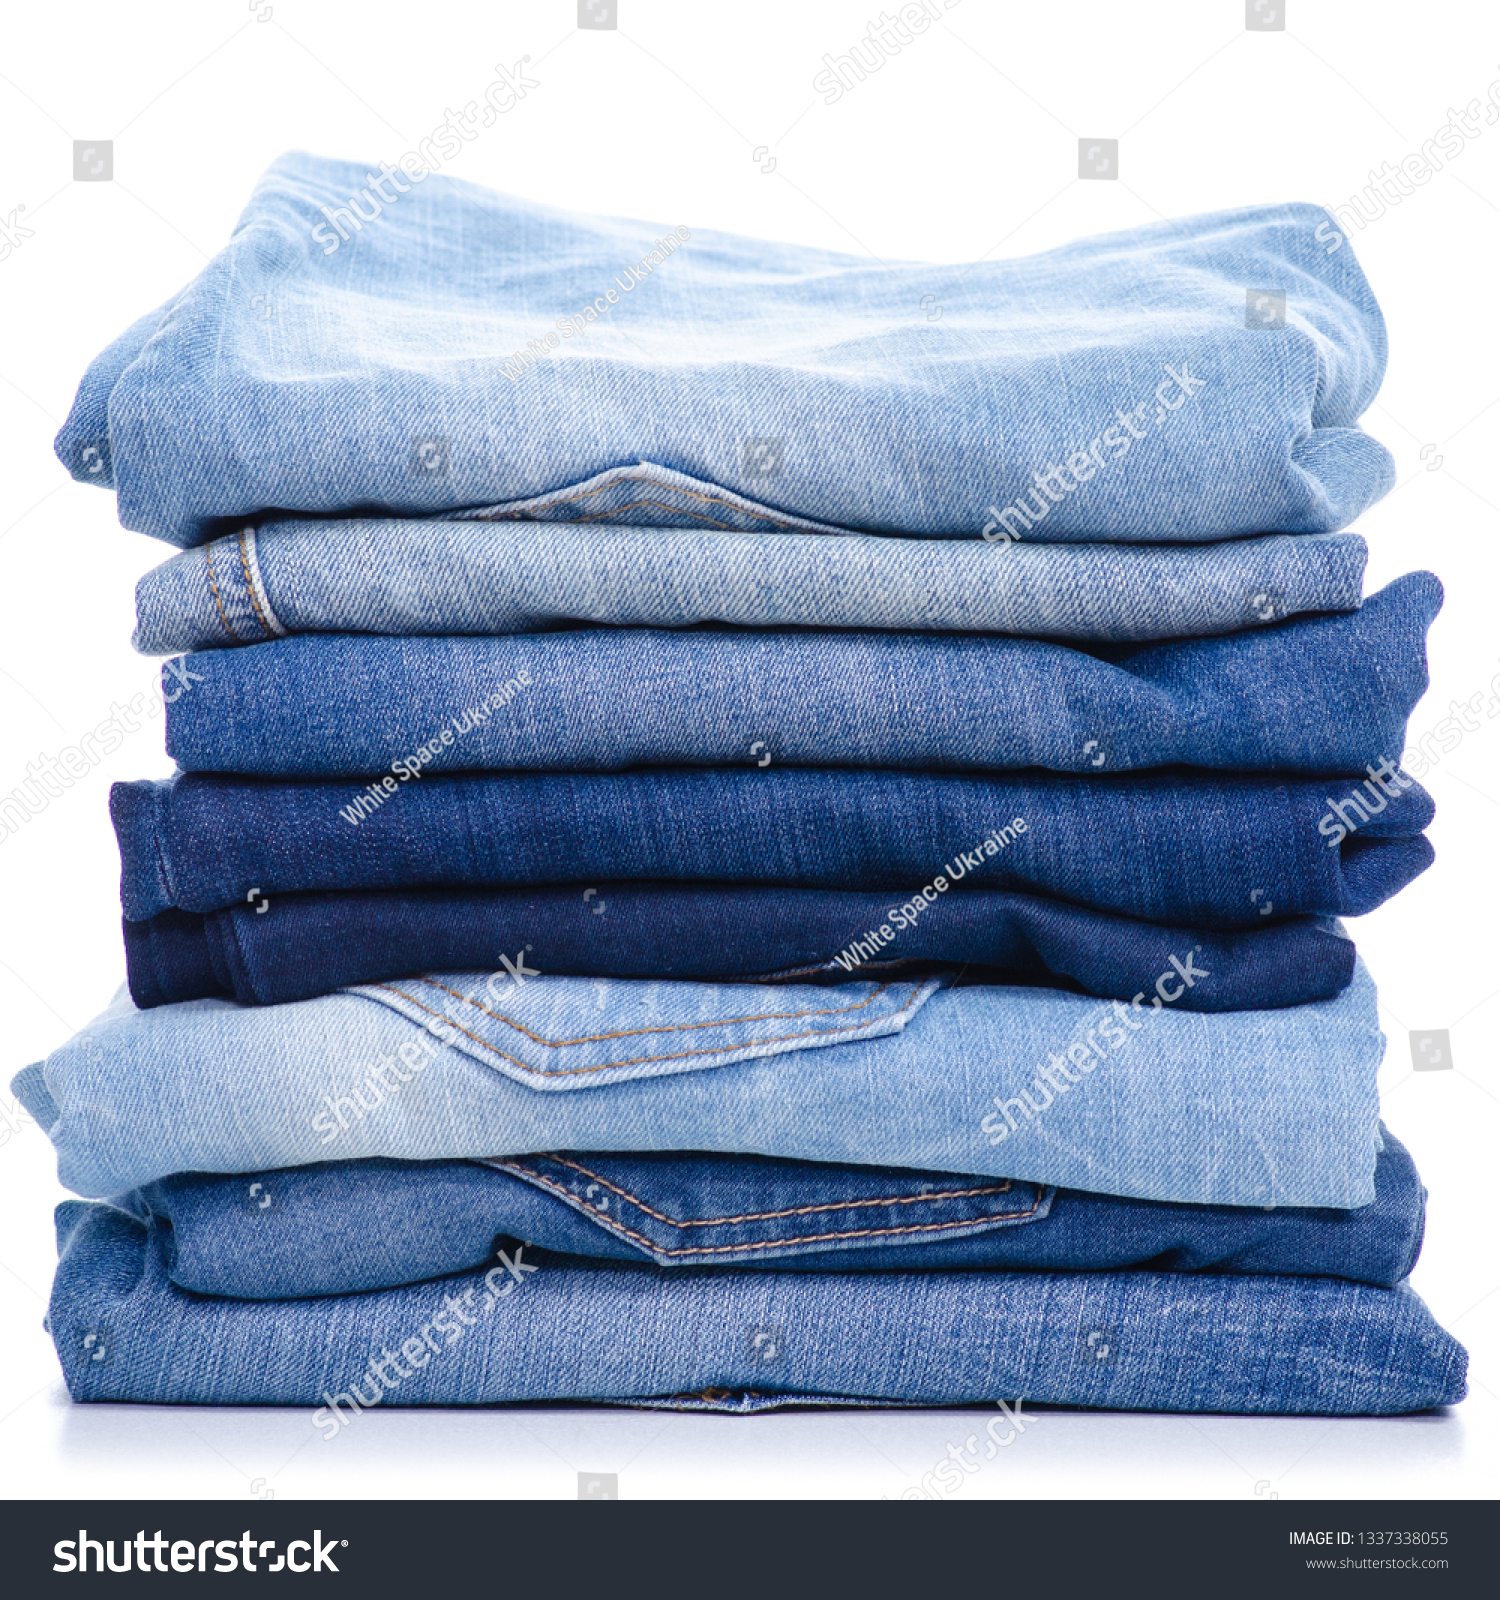 Stack blue jeans on white background isolation #1337338055